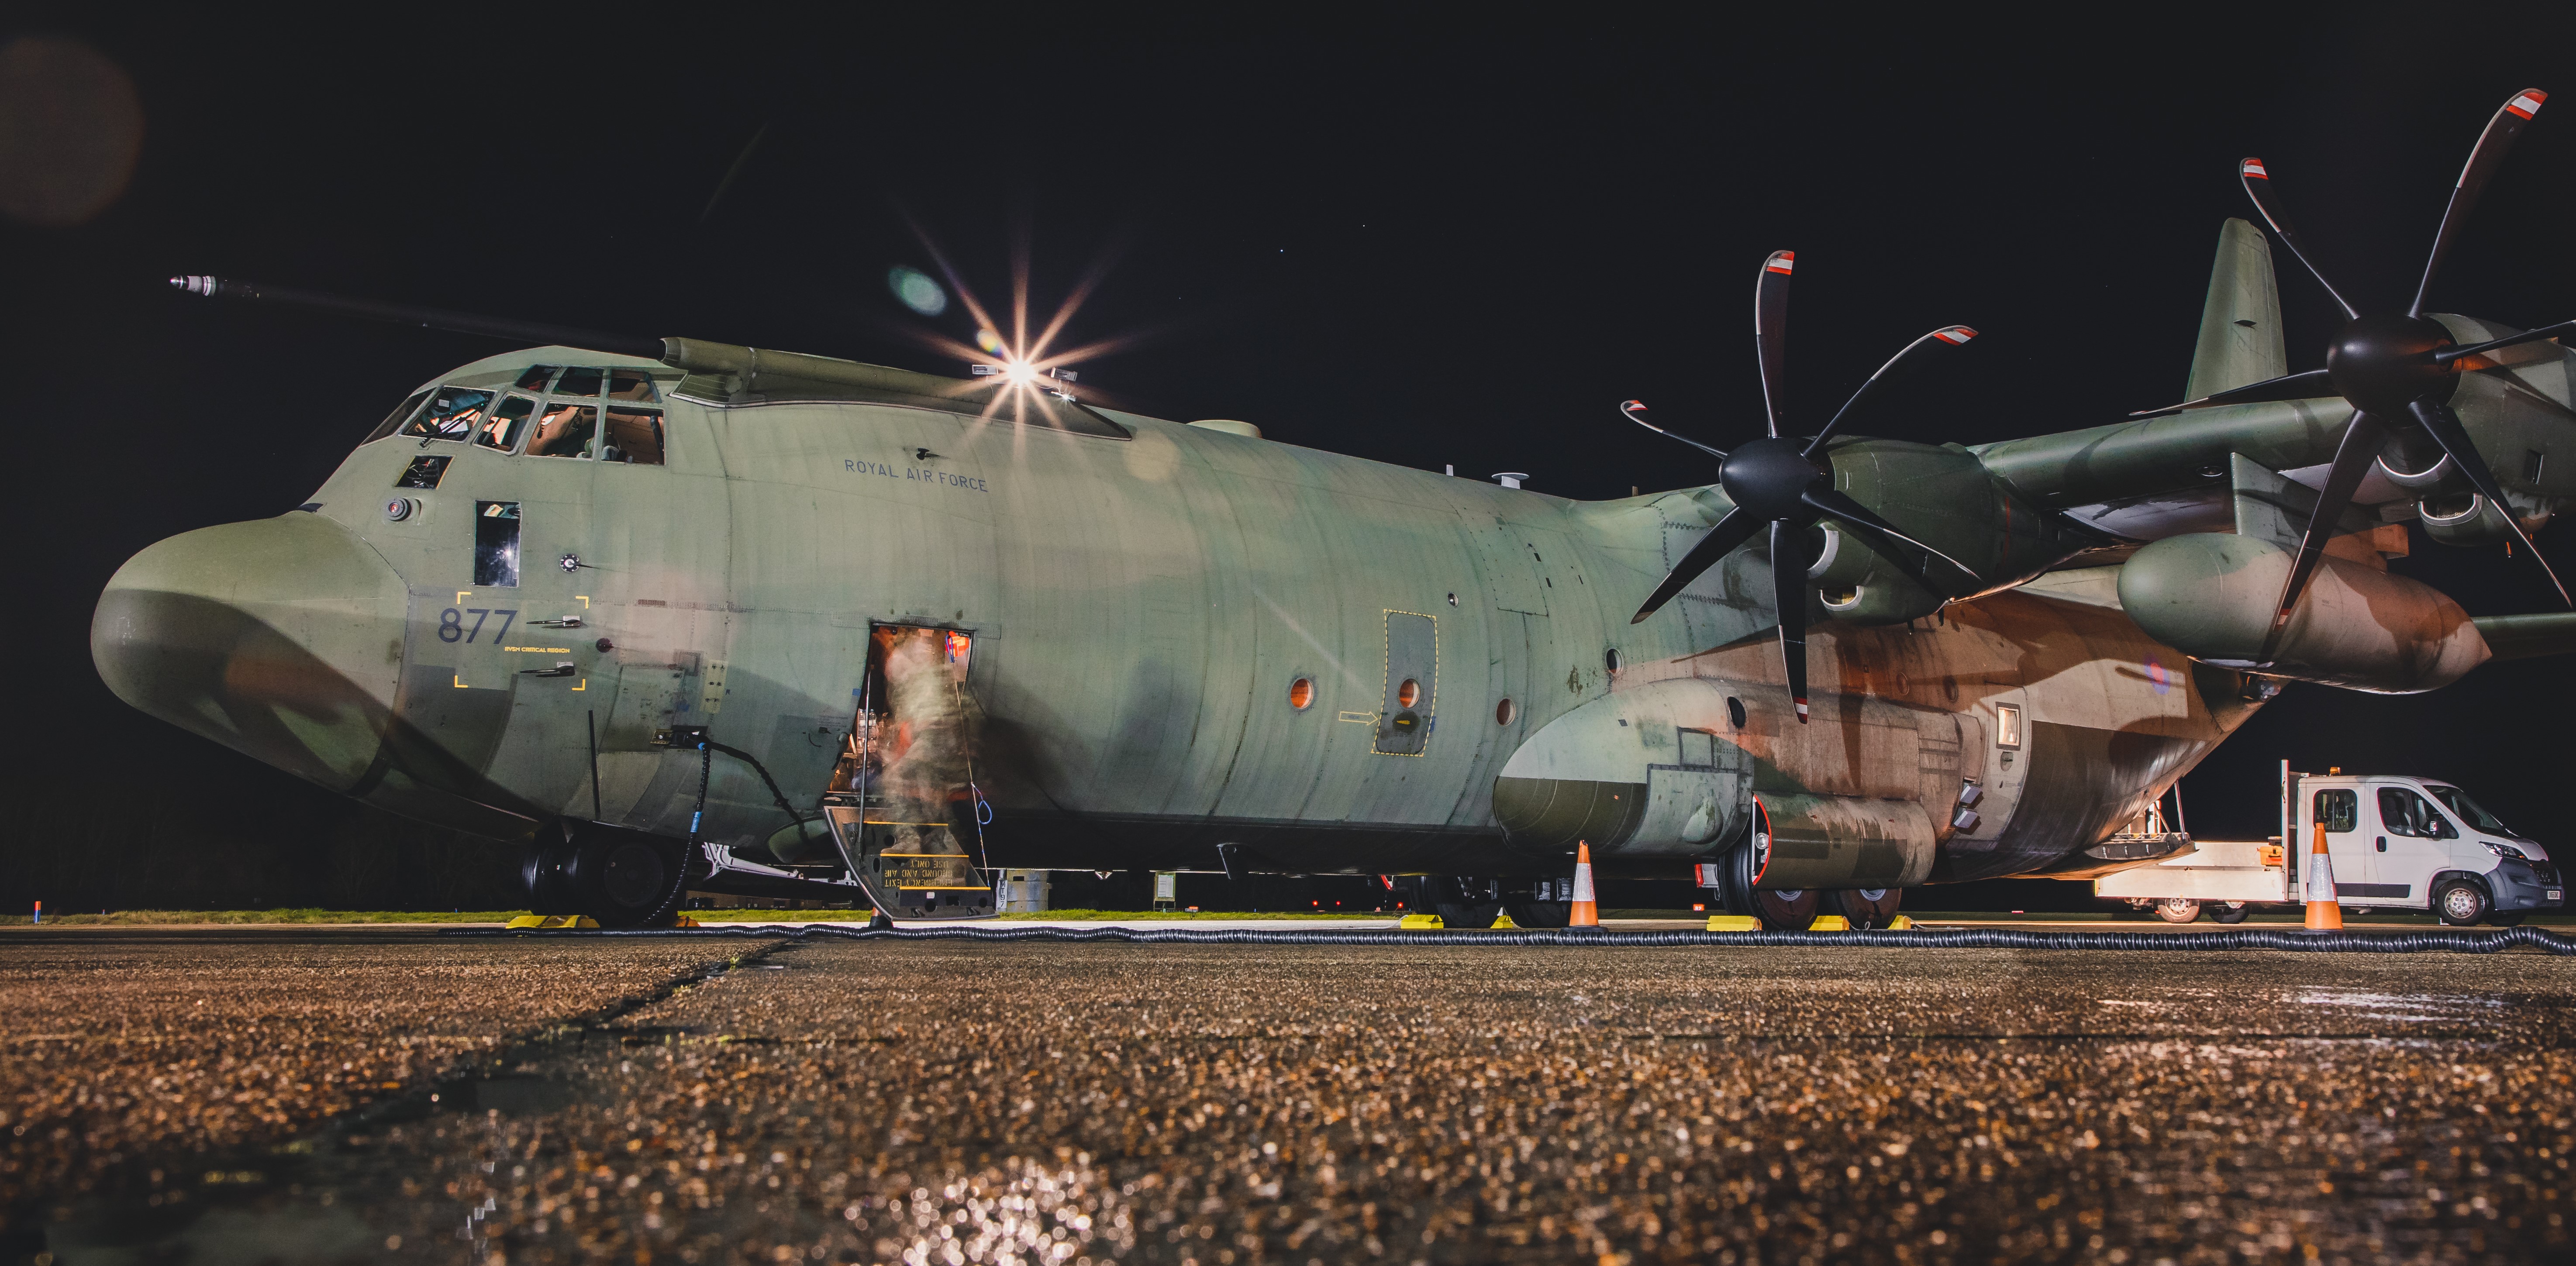 Image shows the RAF Hercules aircraft parking on the airfield at night.